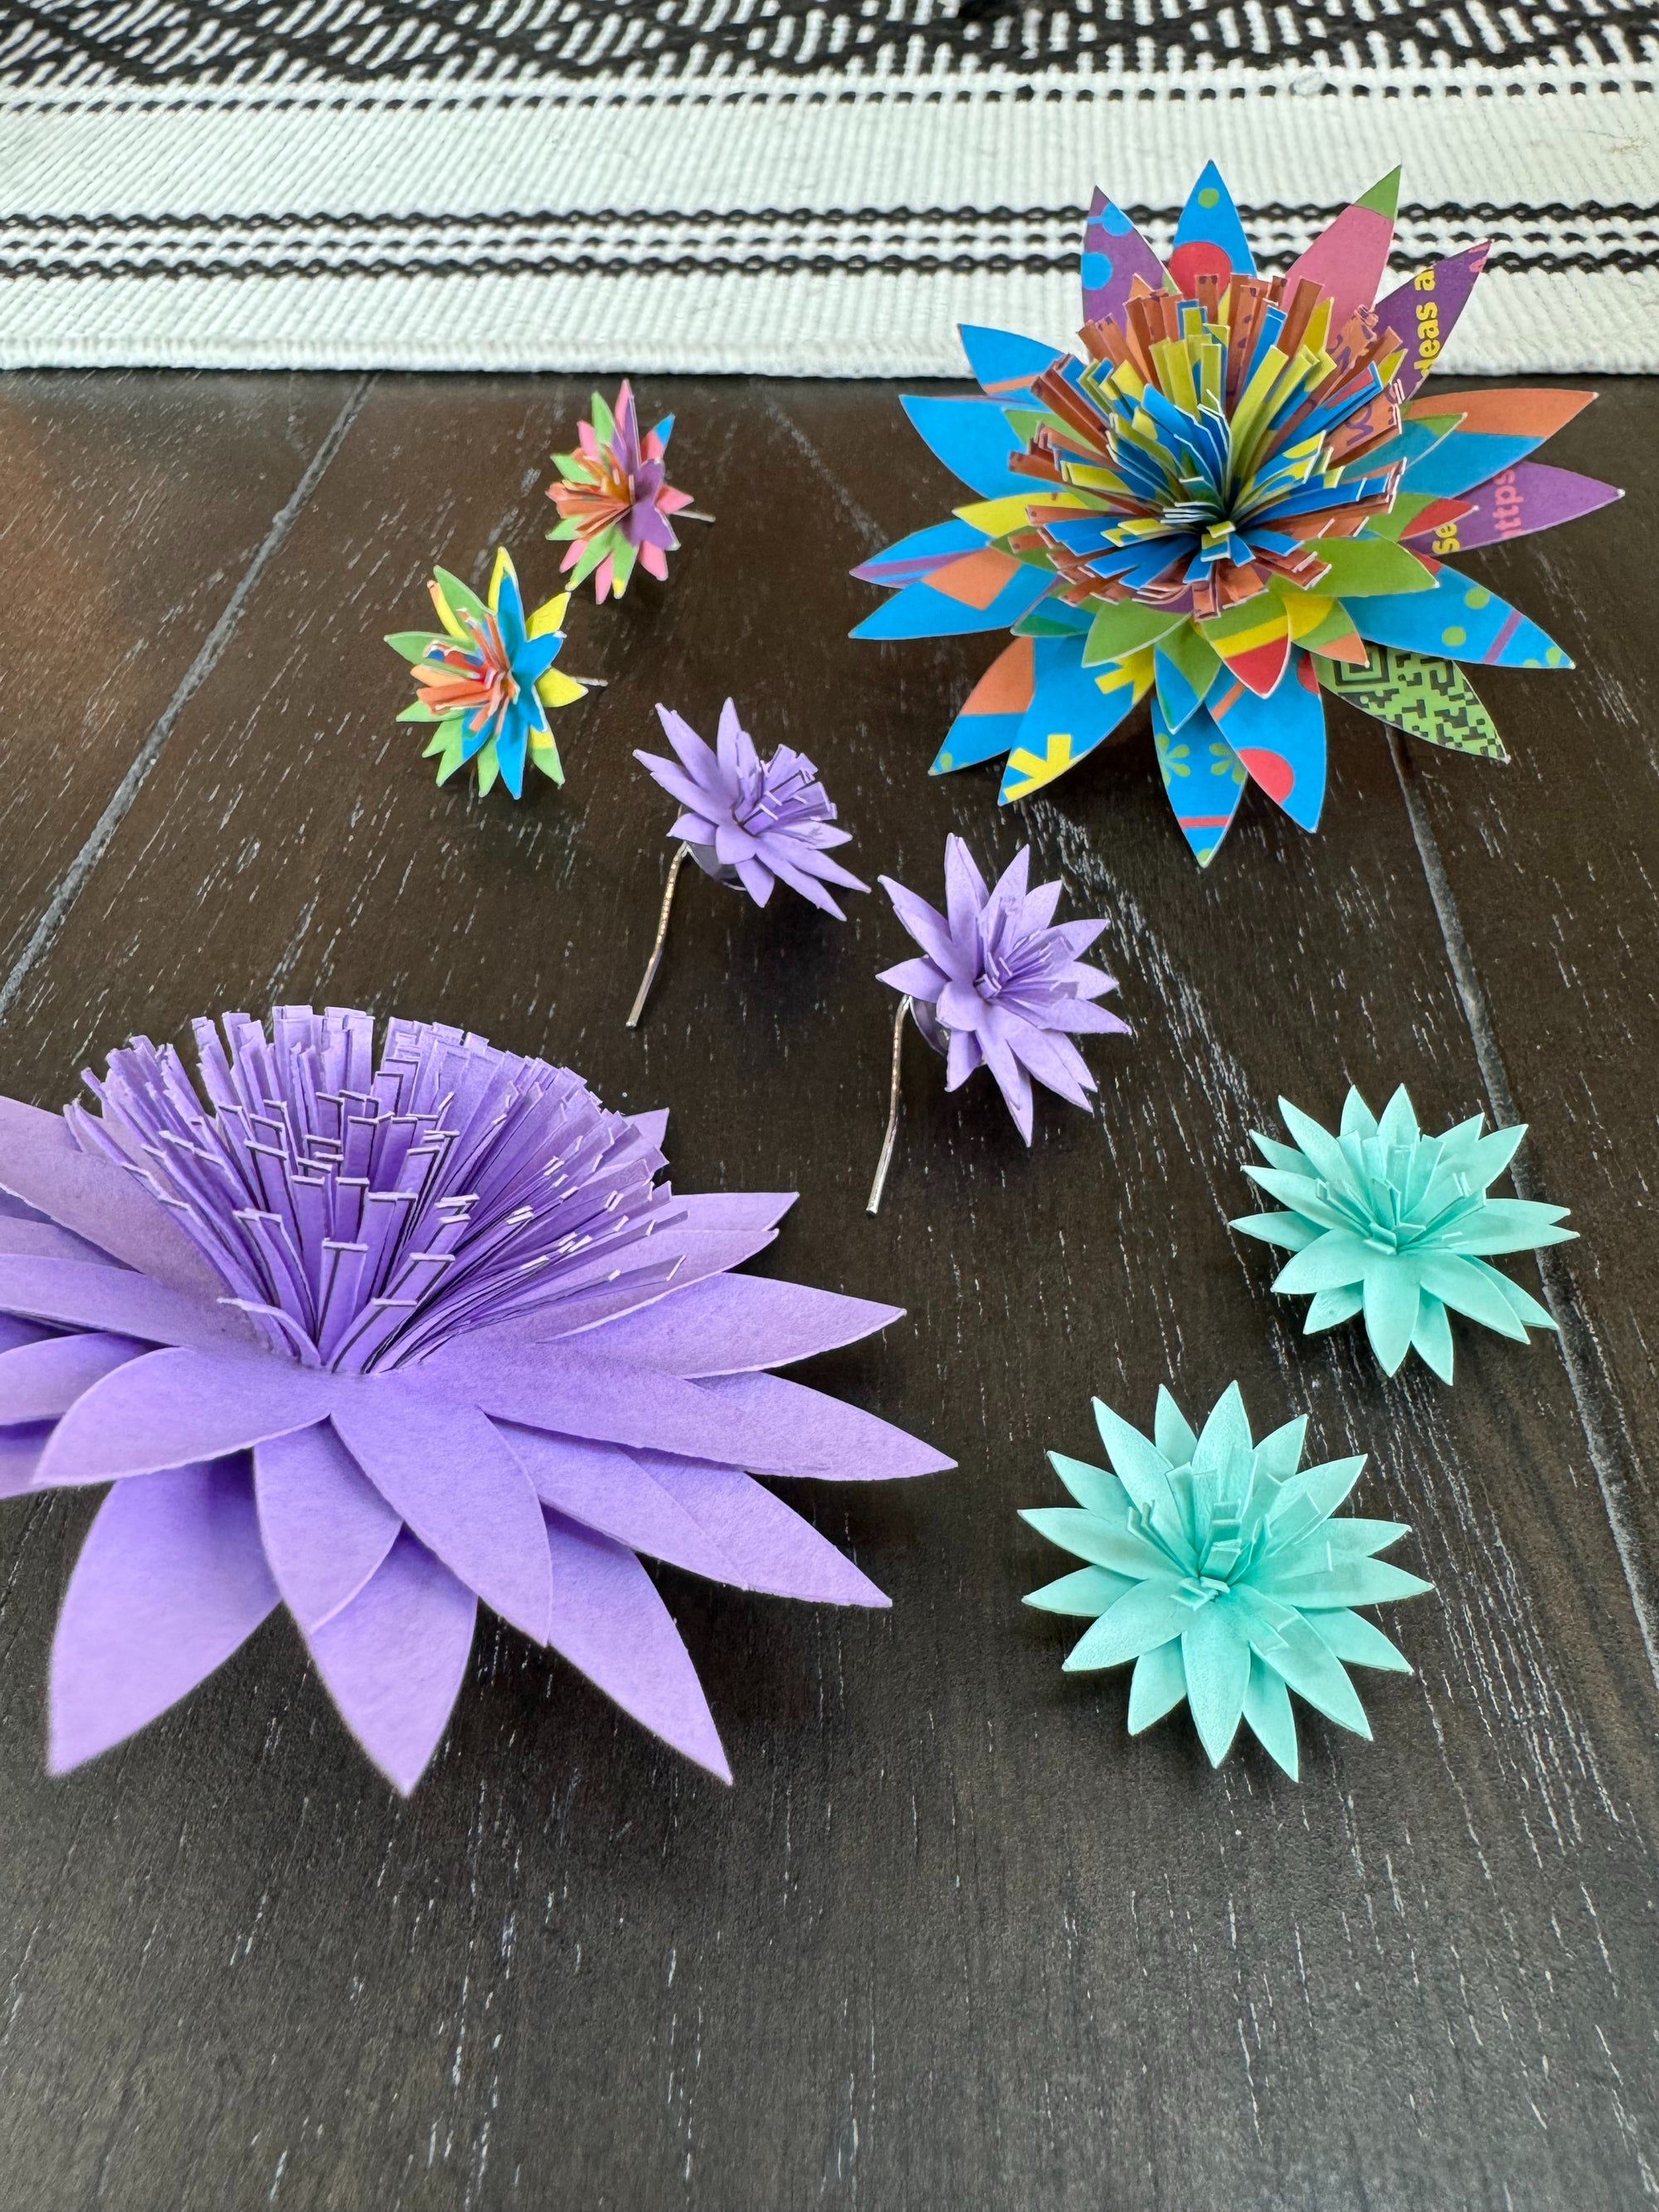 Digital Download: Create Your Own Paper Sculpture Flowers